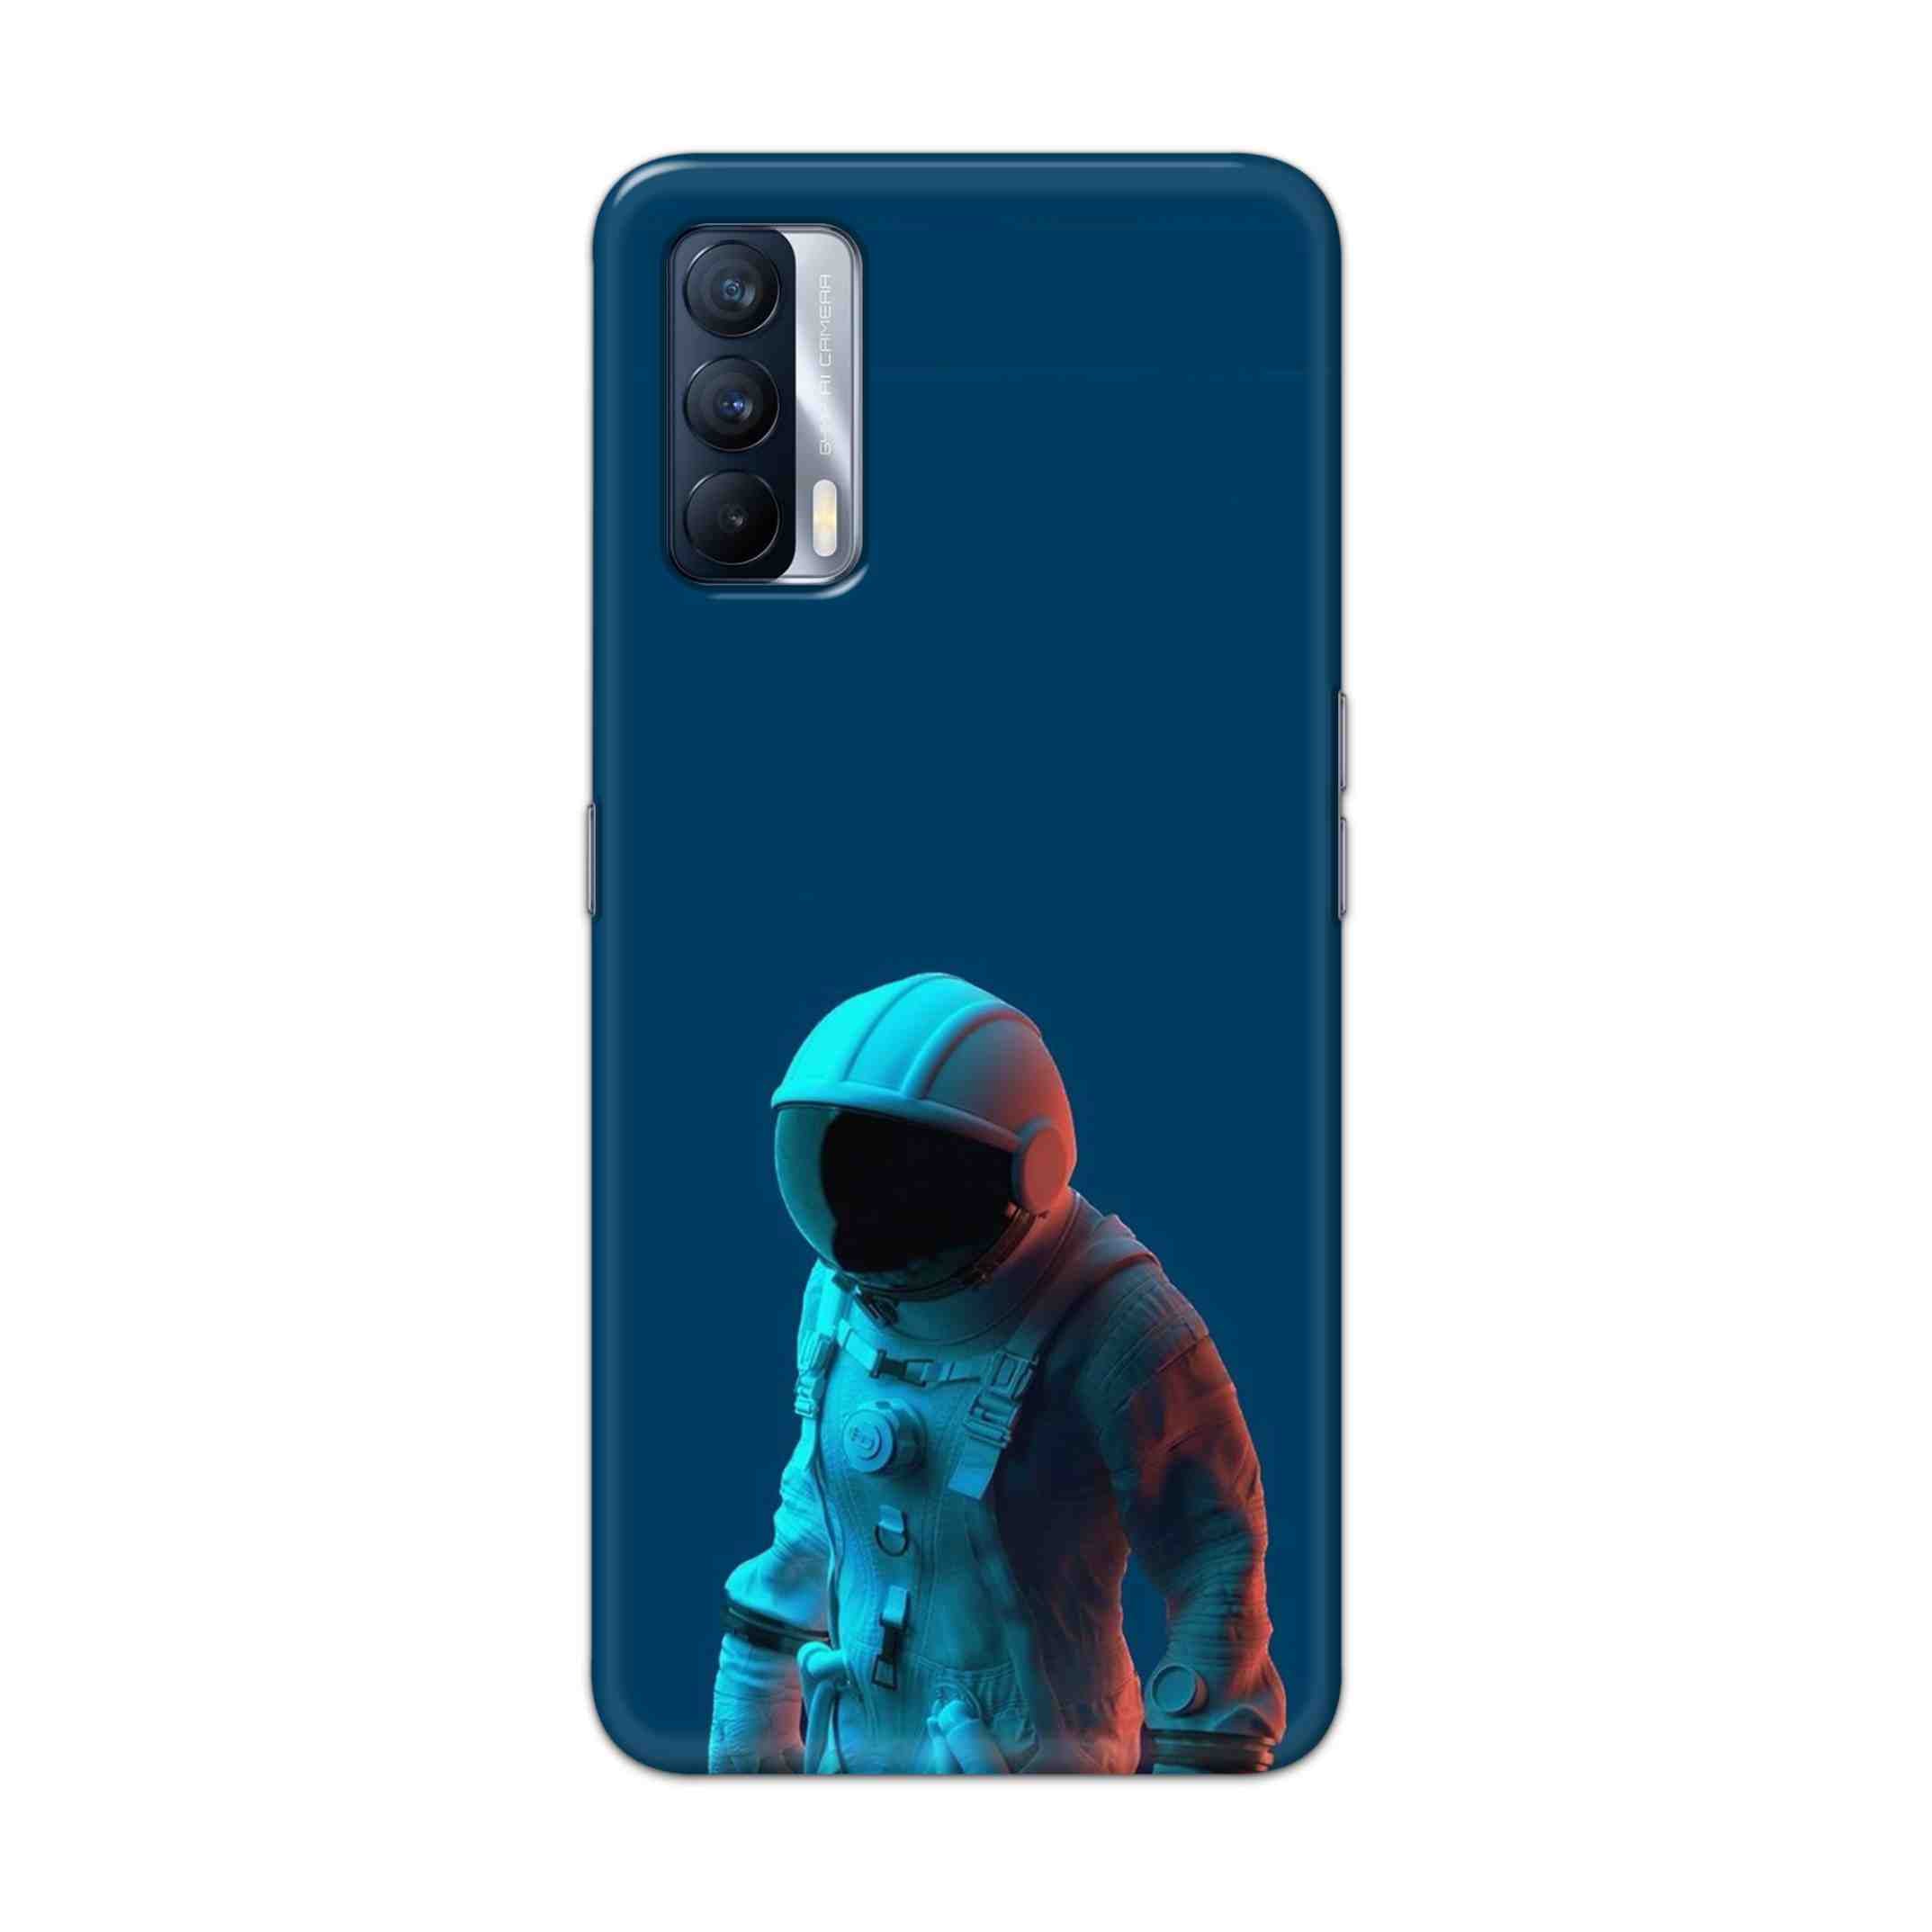 Buy Blue Astronaut Hard Back Mobile Phone Case Cover For Realme X7 Online